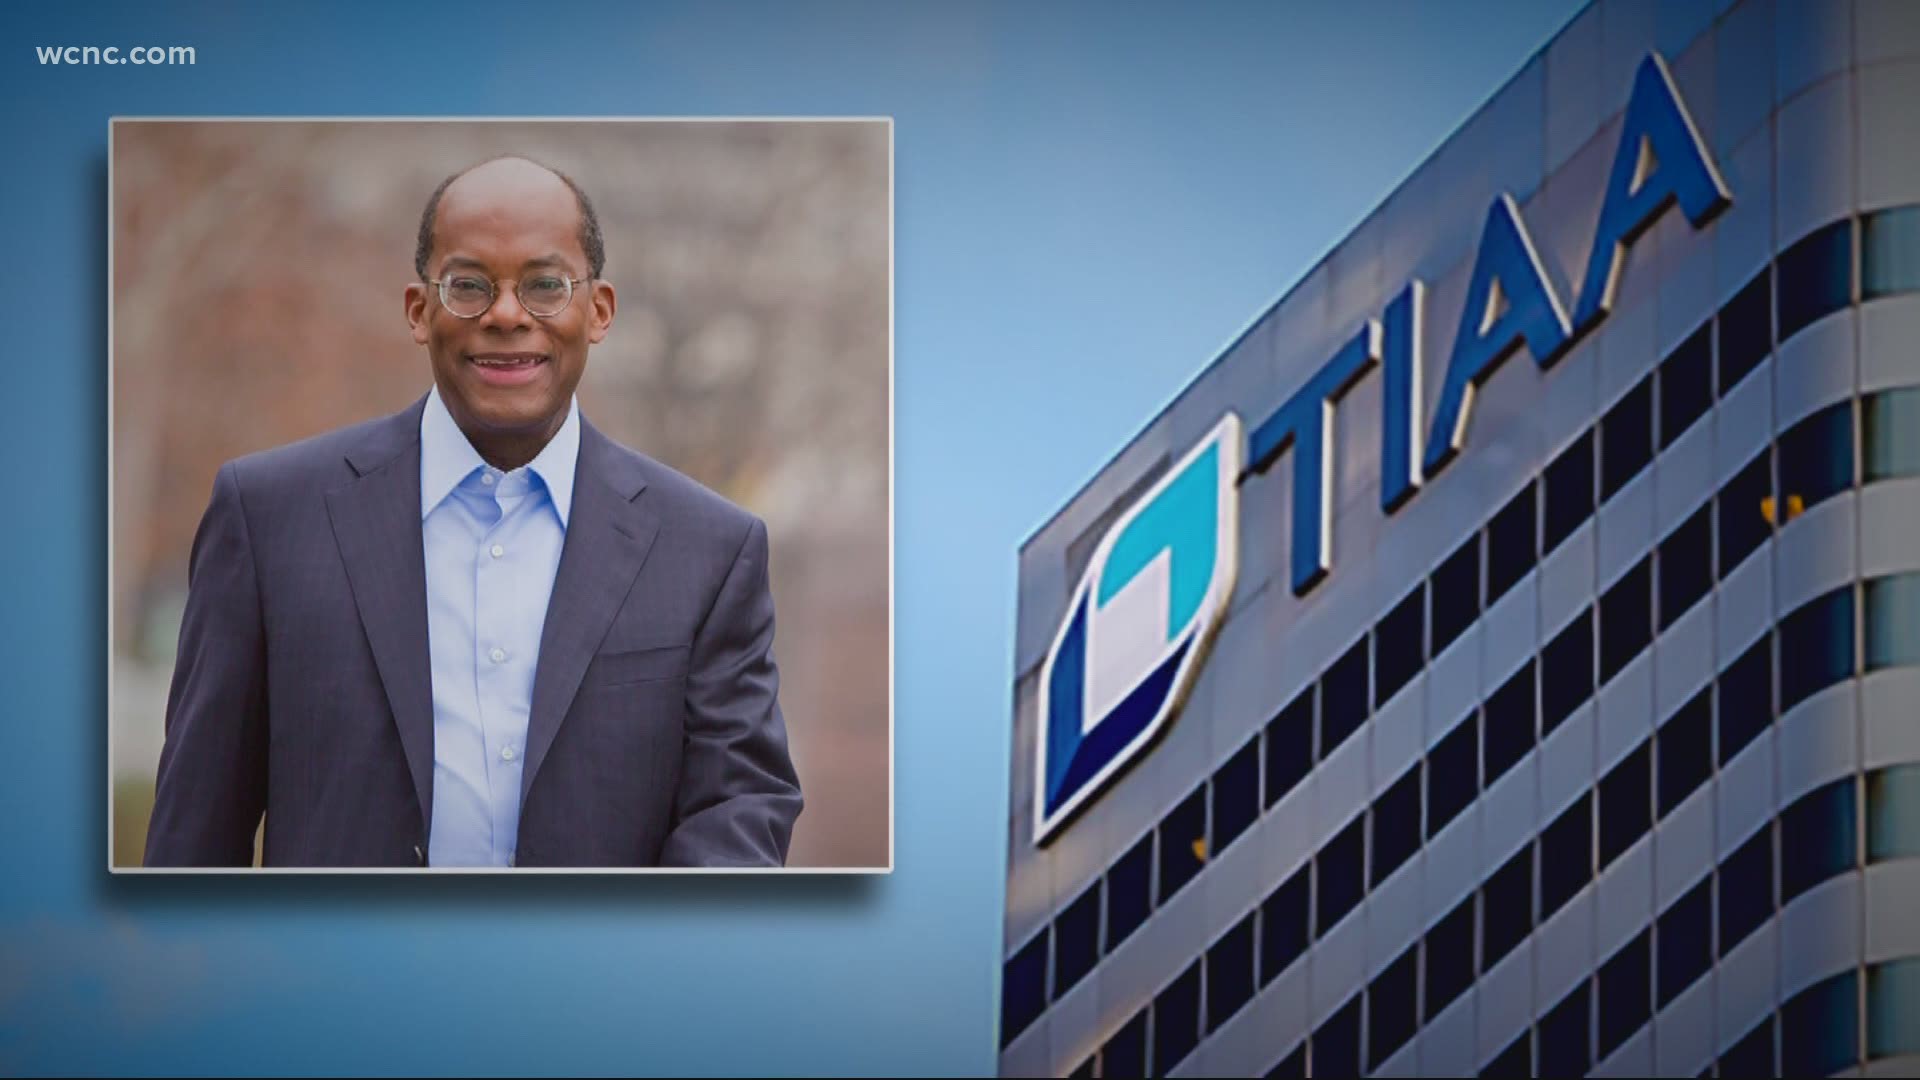 Employees at TIAA say the phrase "be the change" is much more than just a catchy slogan.